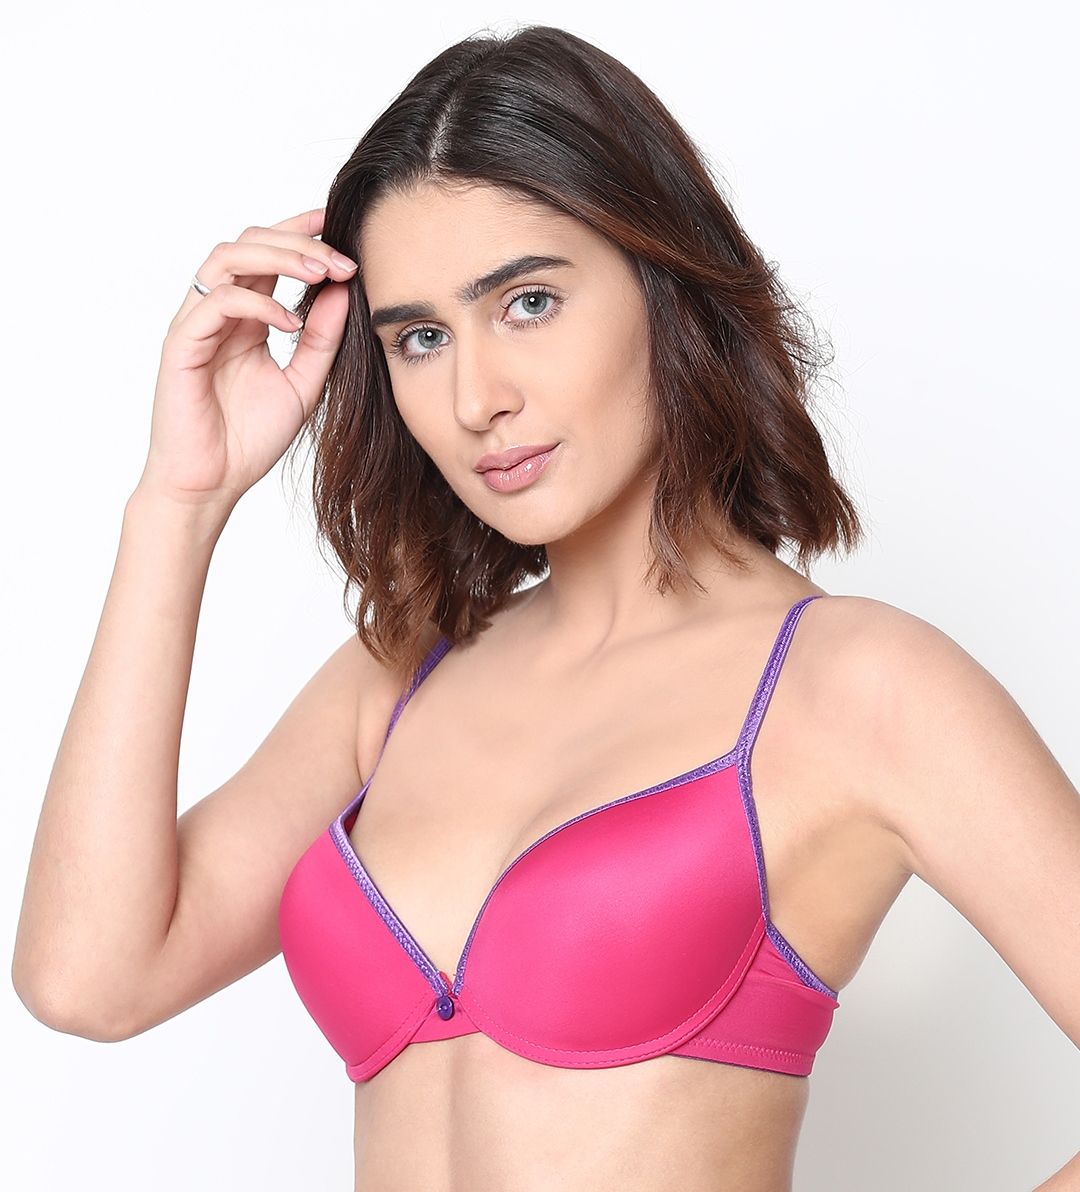 Shyaway 34B Nude Push Up Bra in Bikaner - Dealers, Manufacturers &  Suppliers - Justdial